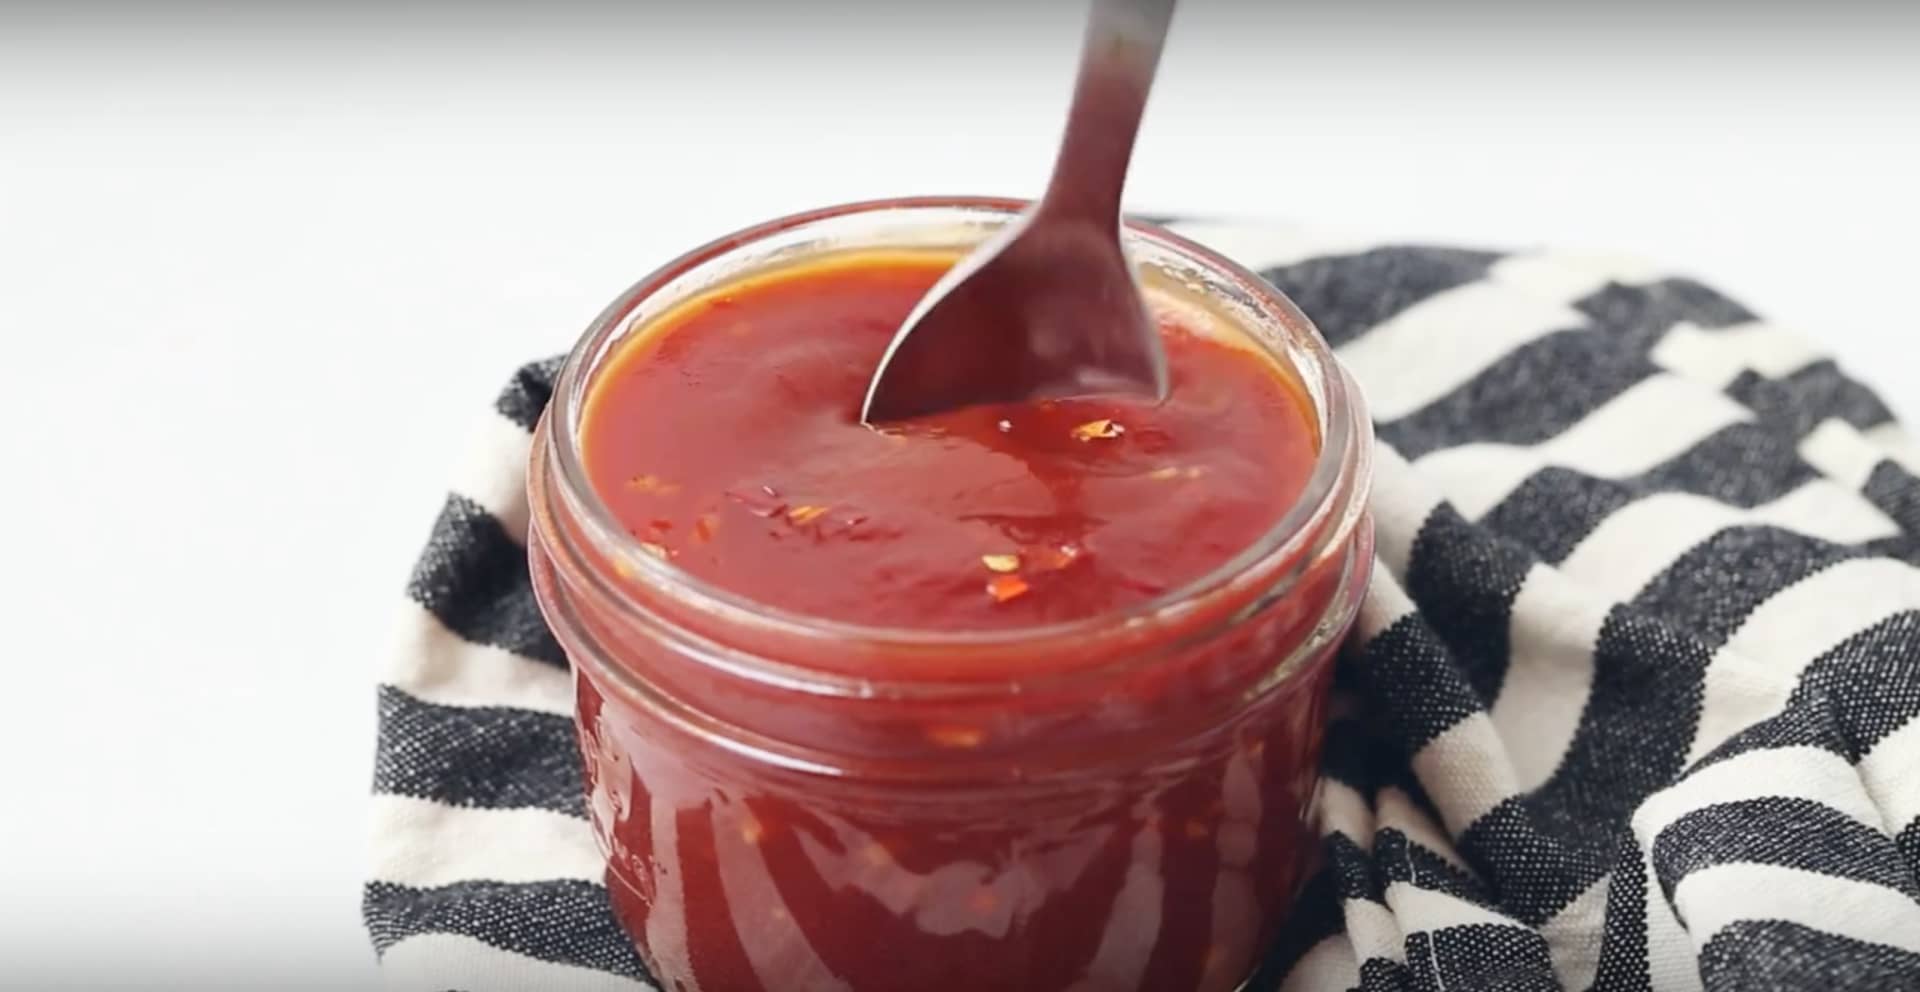 Easy Barbecue Sauce Recipe with Ketchup (Our Fave!)